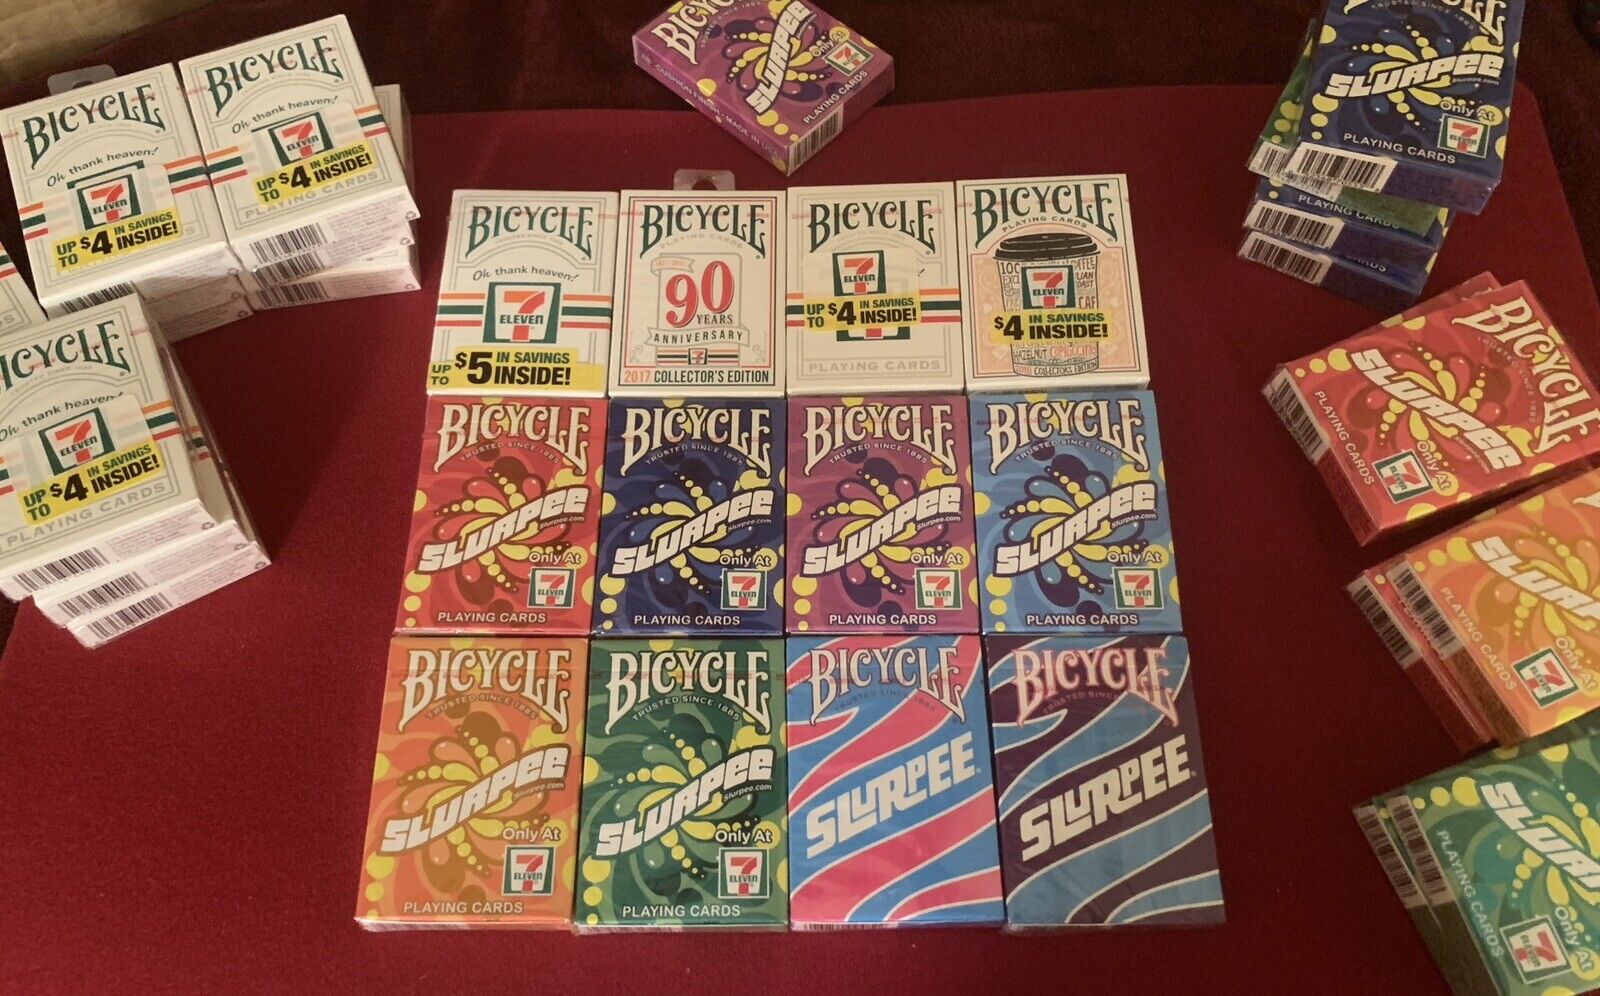 7-eleven Complete Bicycle Card 12 Deck Full Set Only 1 On The Net